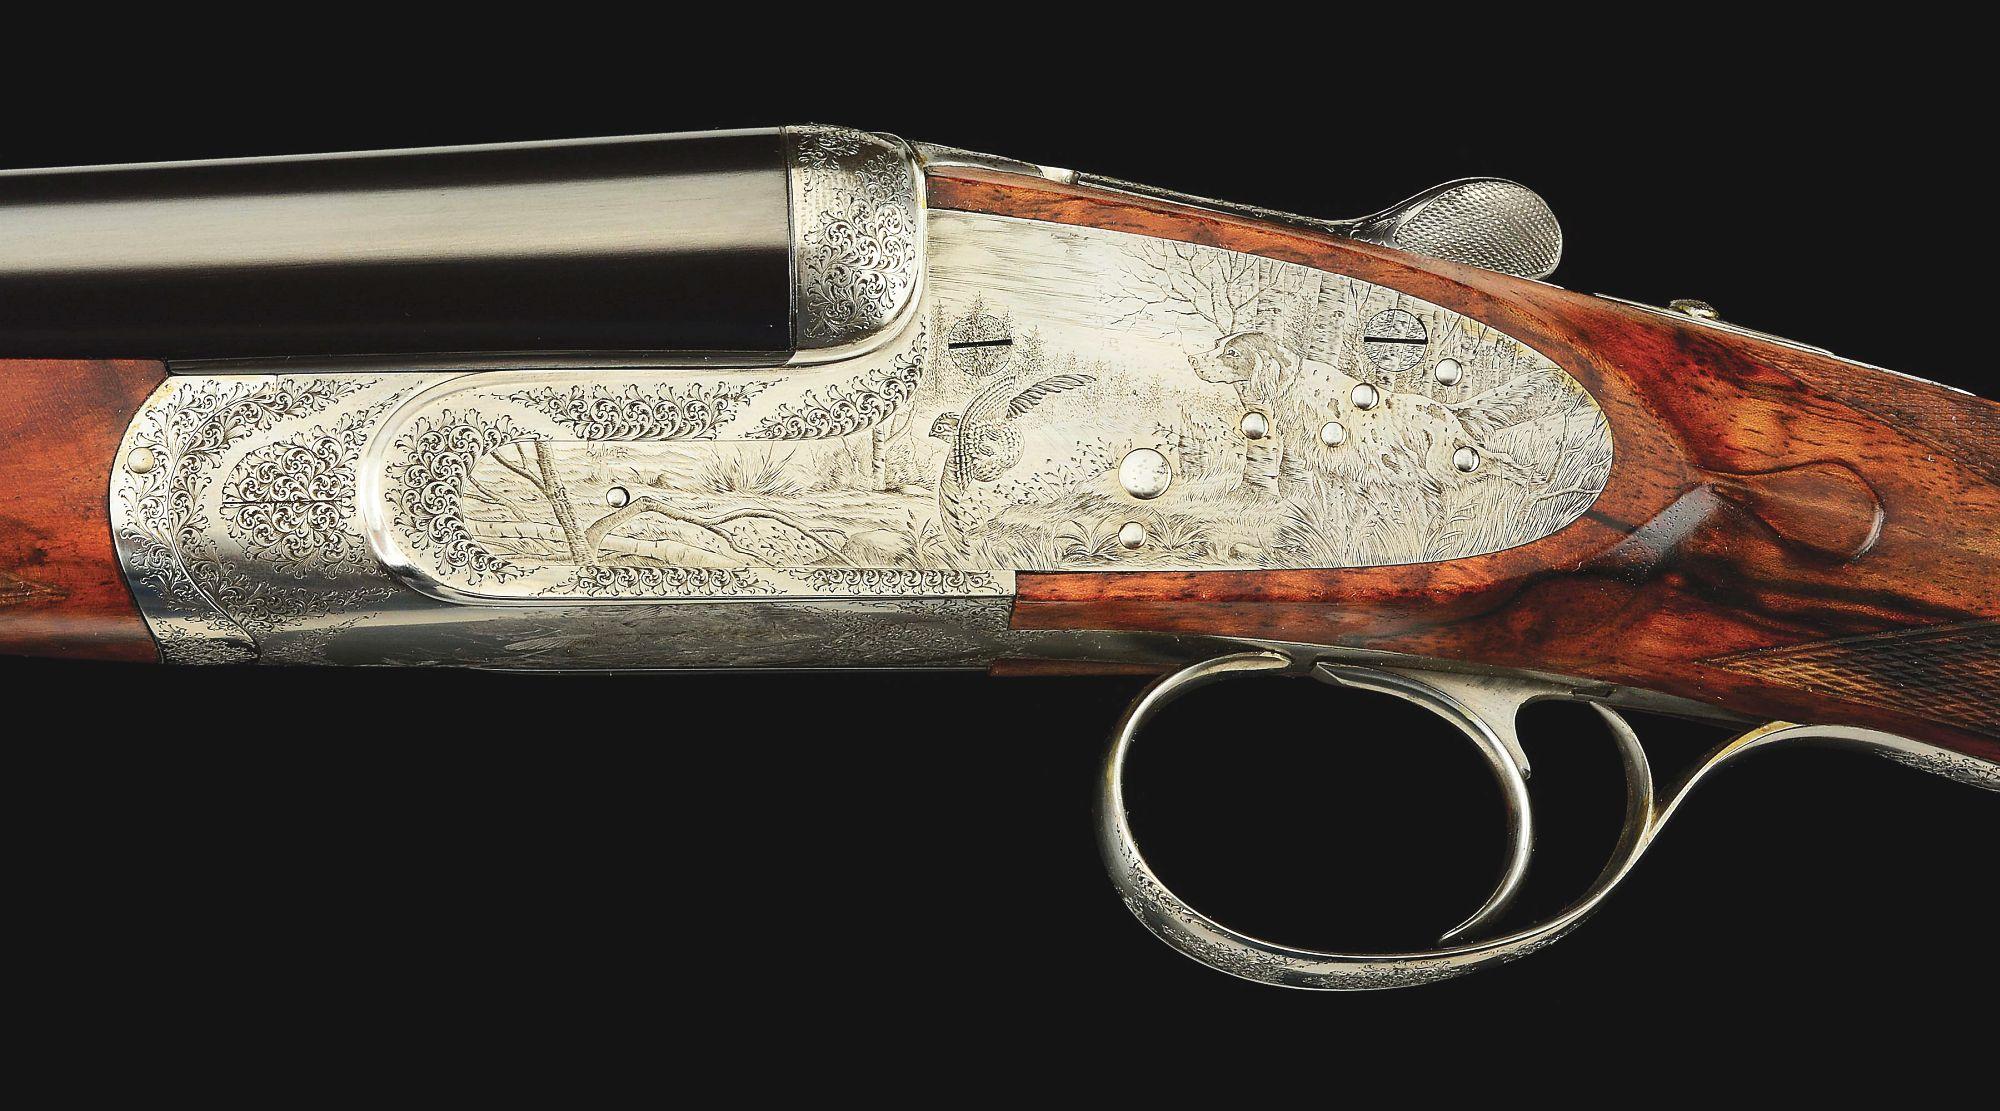 (M) 20 BORE ABBIATICO AND SALVINELLI SIDE BY SIDE SHOTGUN WITH FINE GAME SCENE ENGRAVING BY F.  GALE